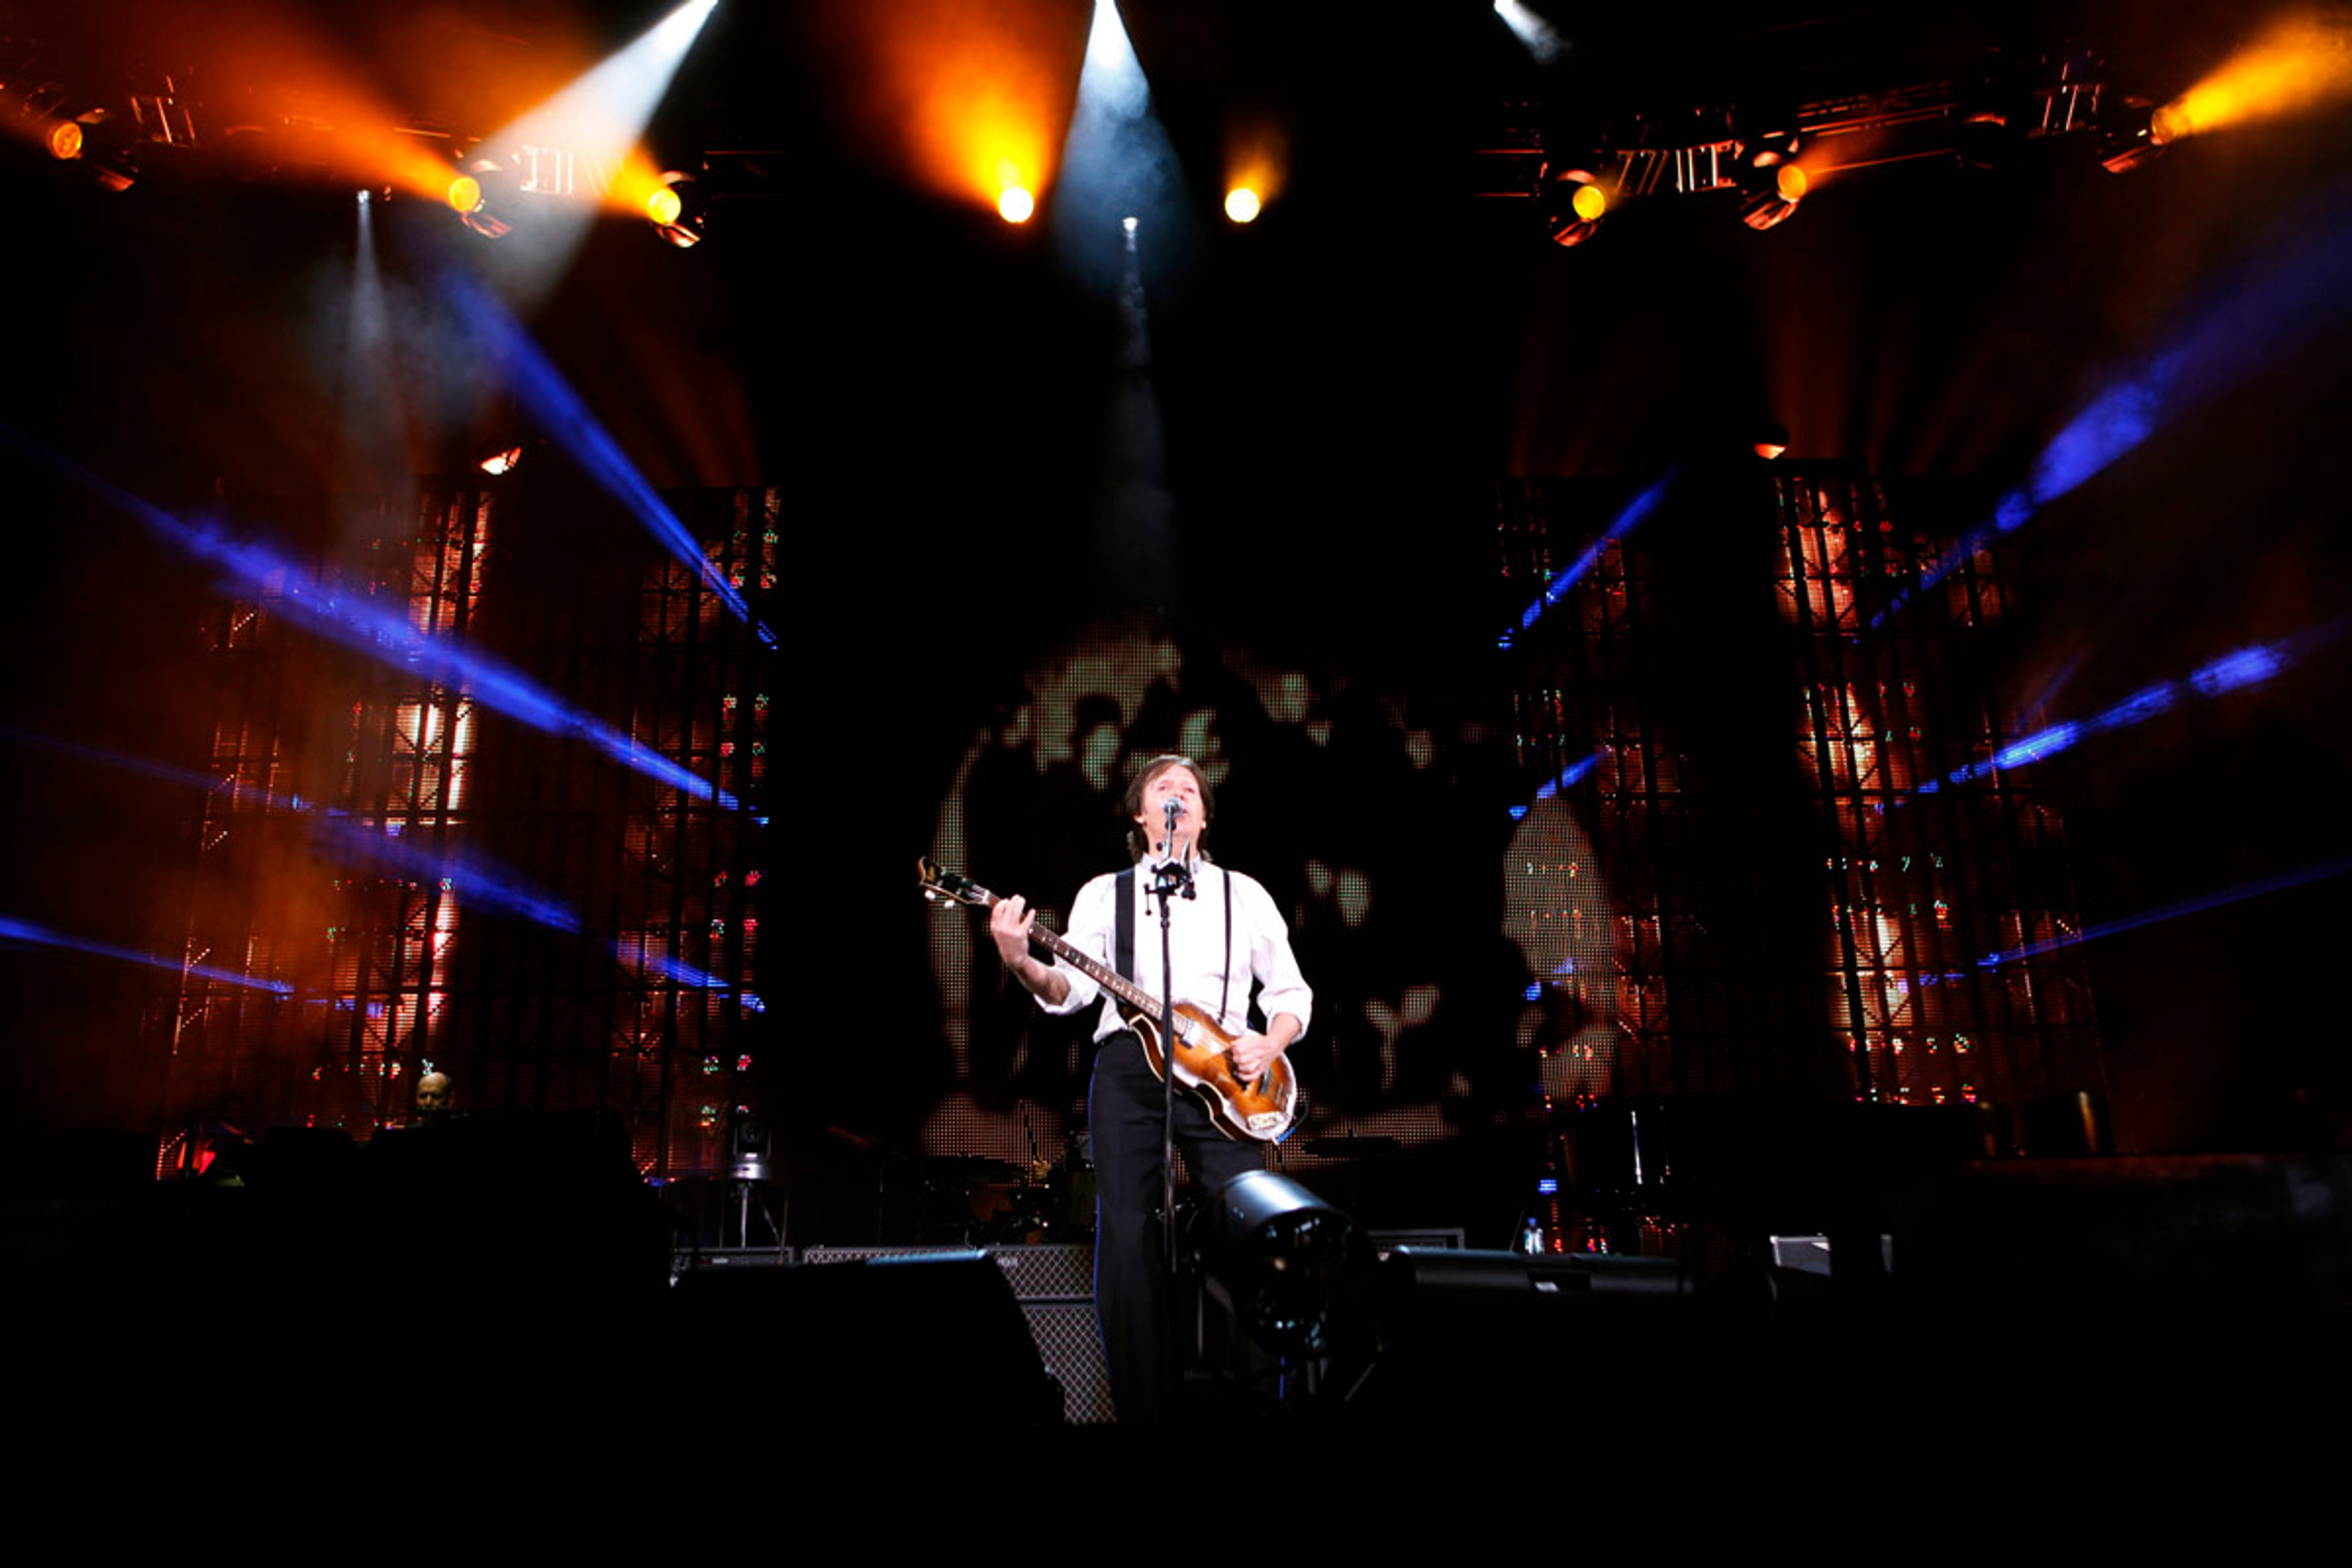 Paul on stage with the cover of 'Band on the Run' on the screen behind him, Minute Maid Park, Houston, 14th November 2012